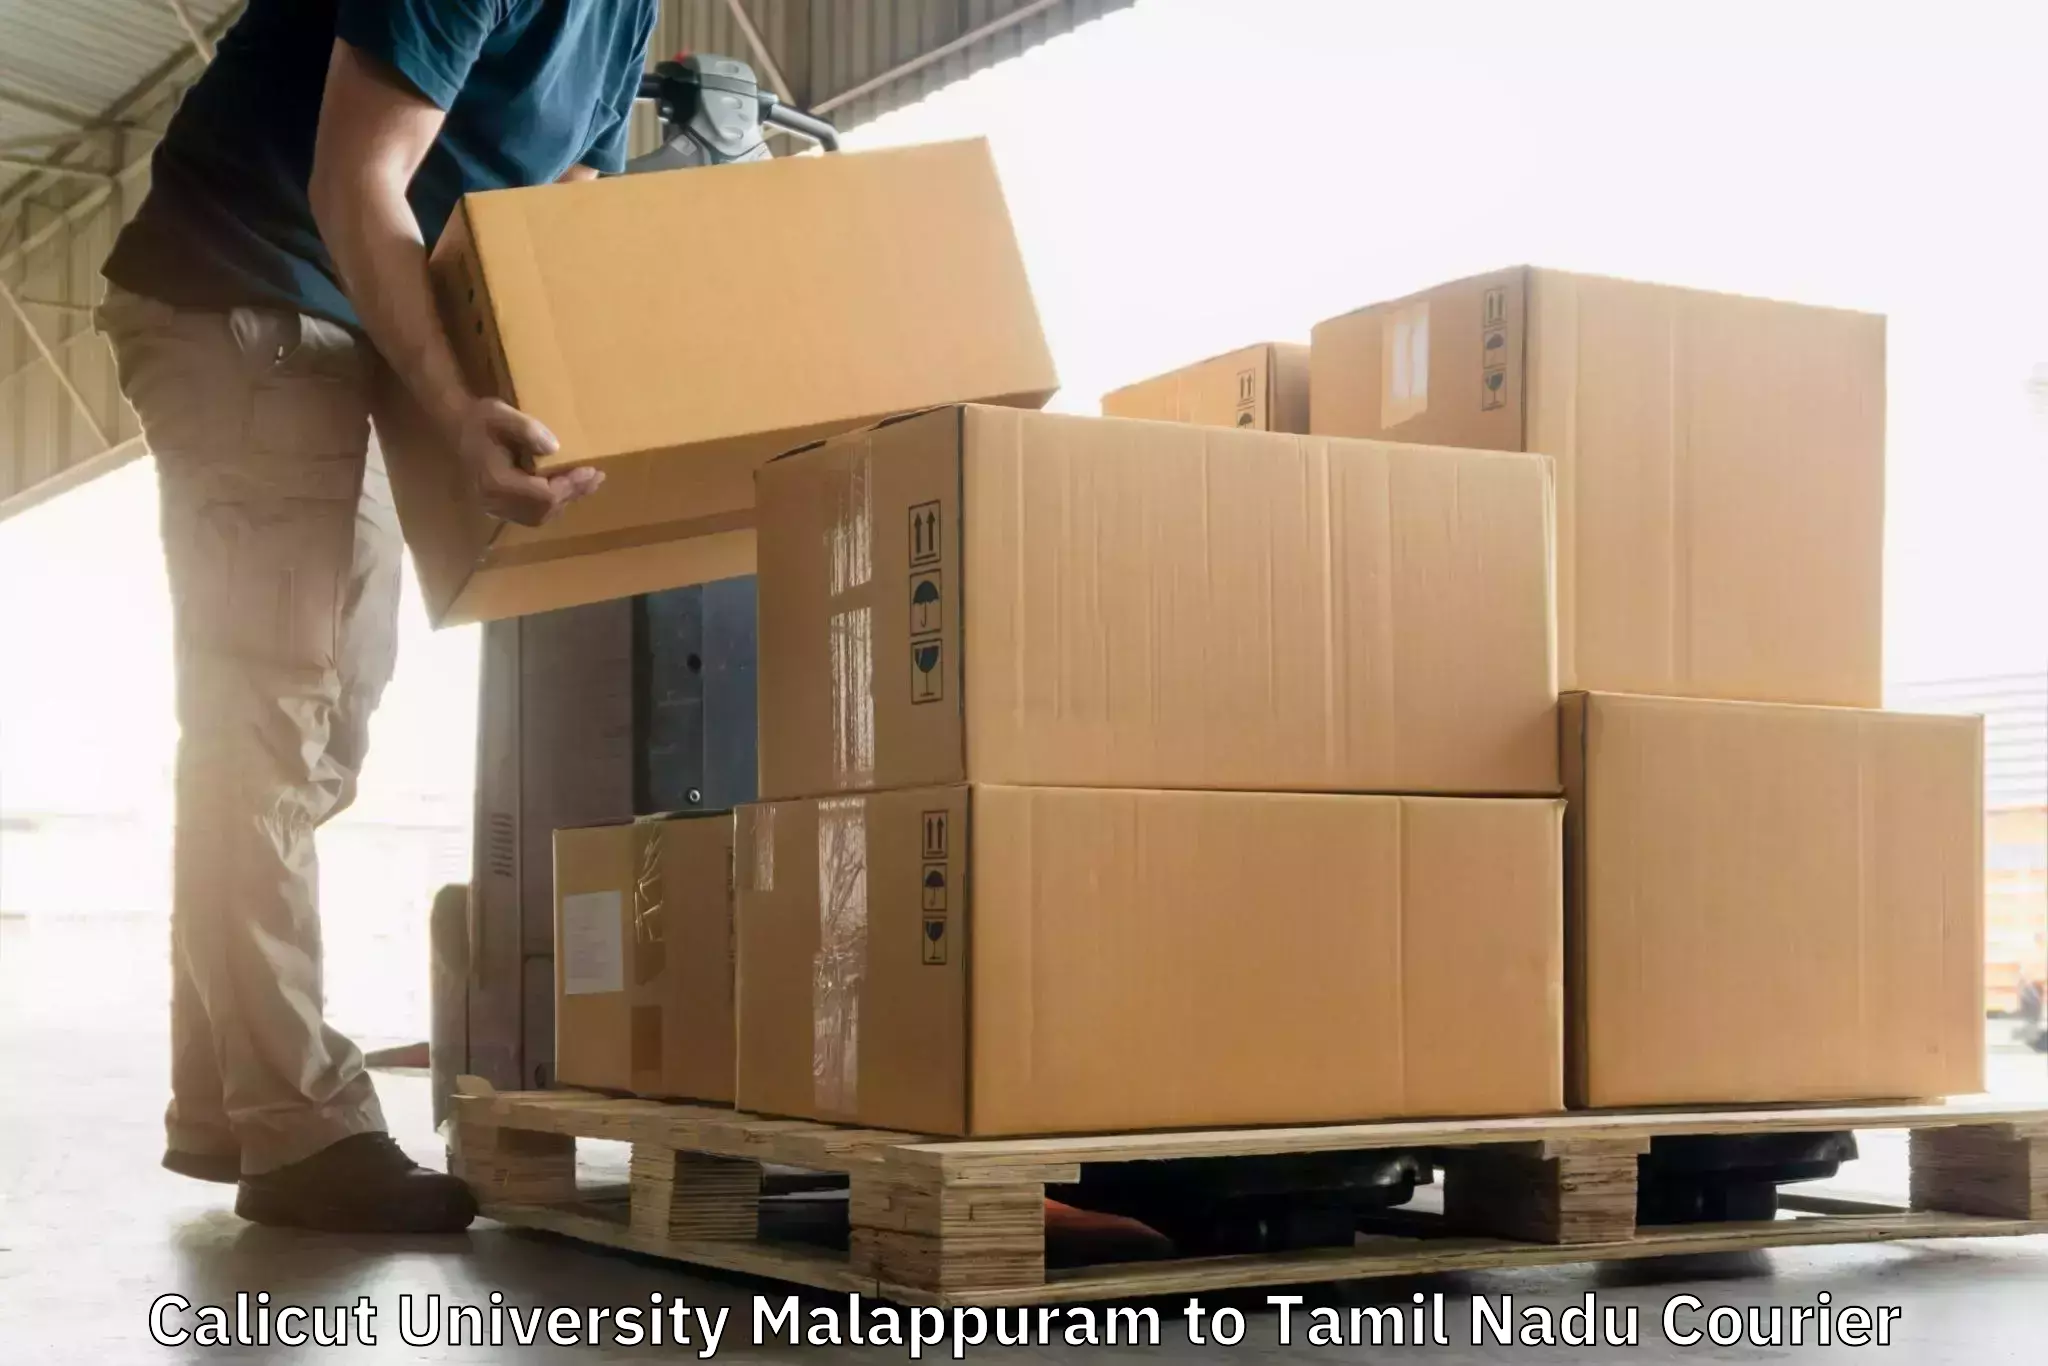 Efficient courier operations Calicut University Malappuram to Nagercoil